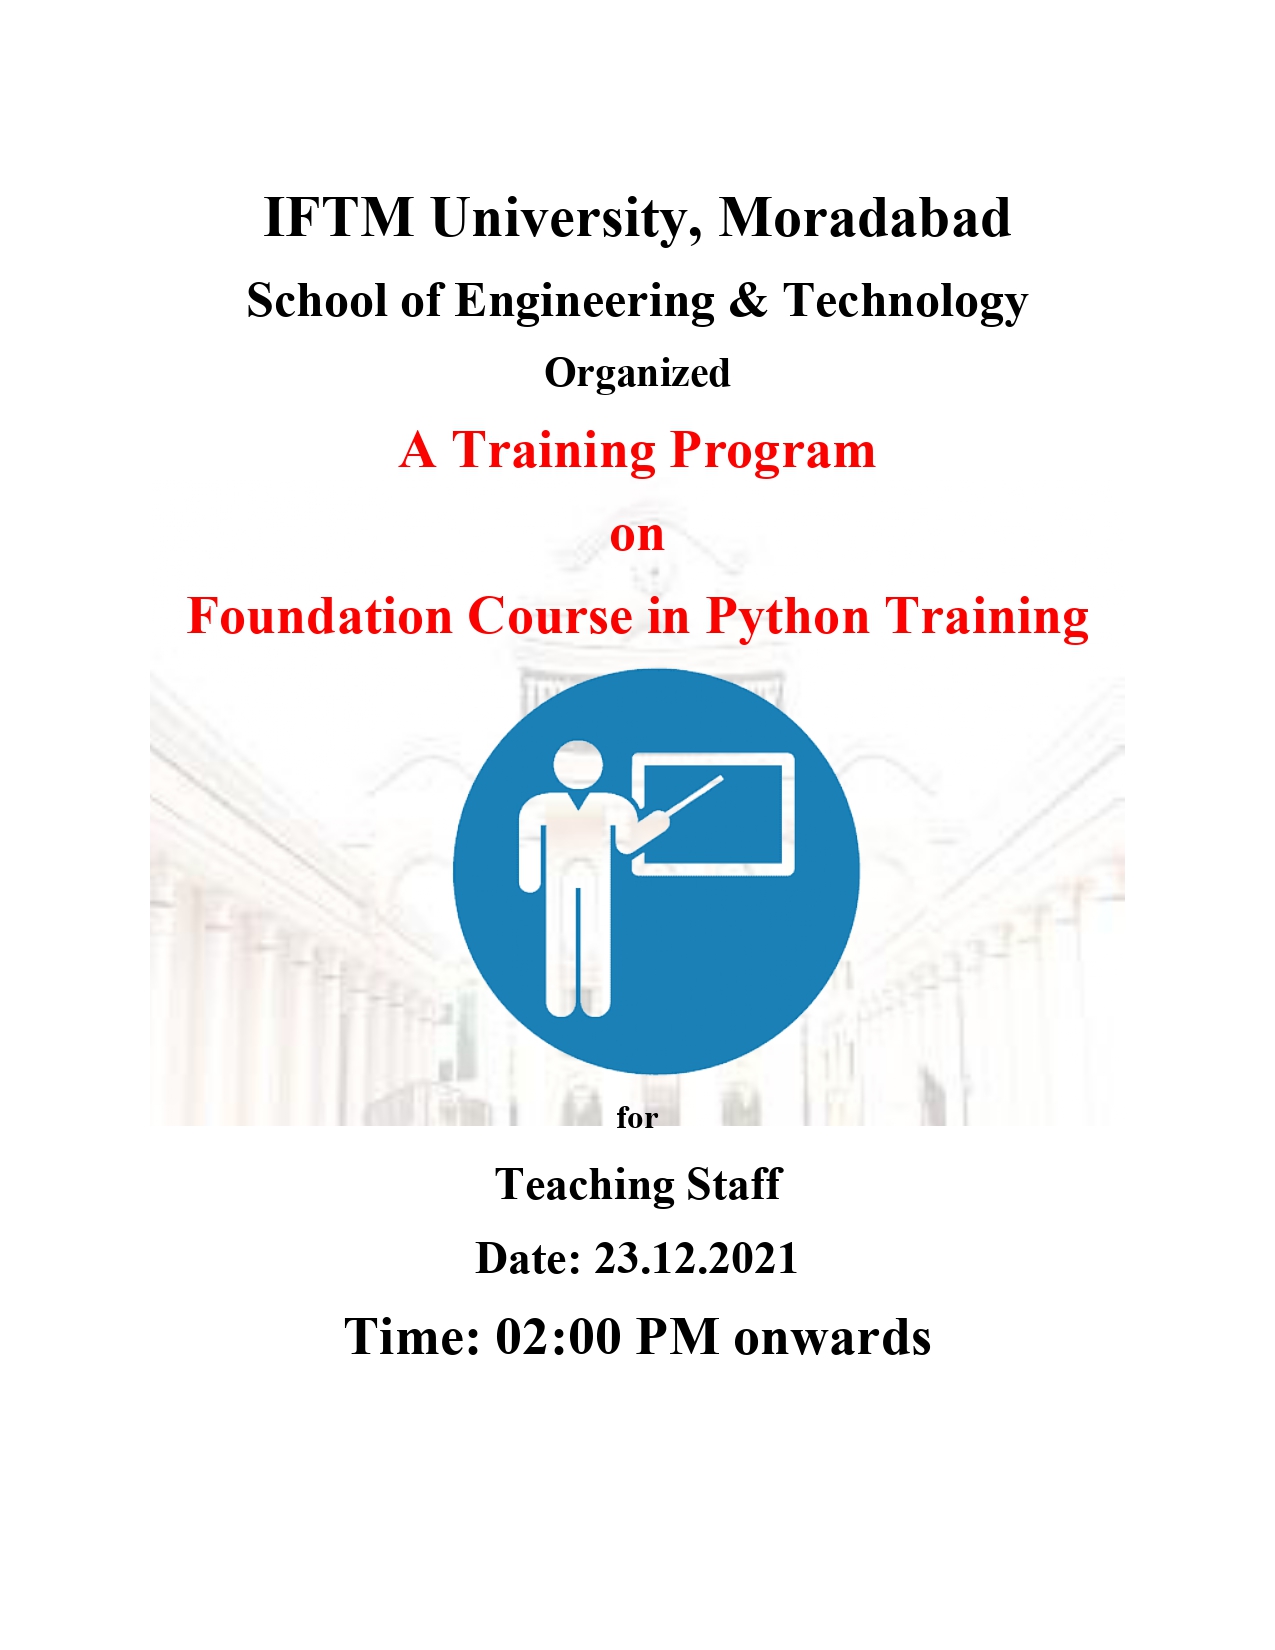 Foundation Course in Python Training for teaching staff